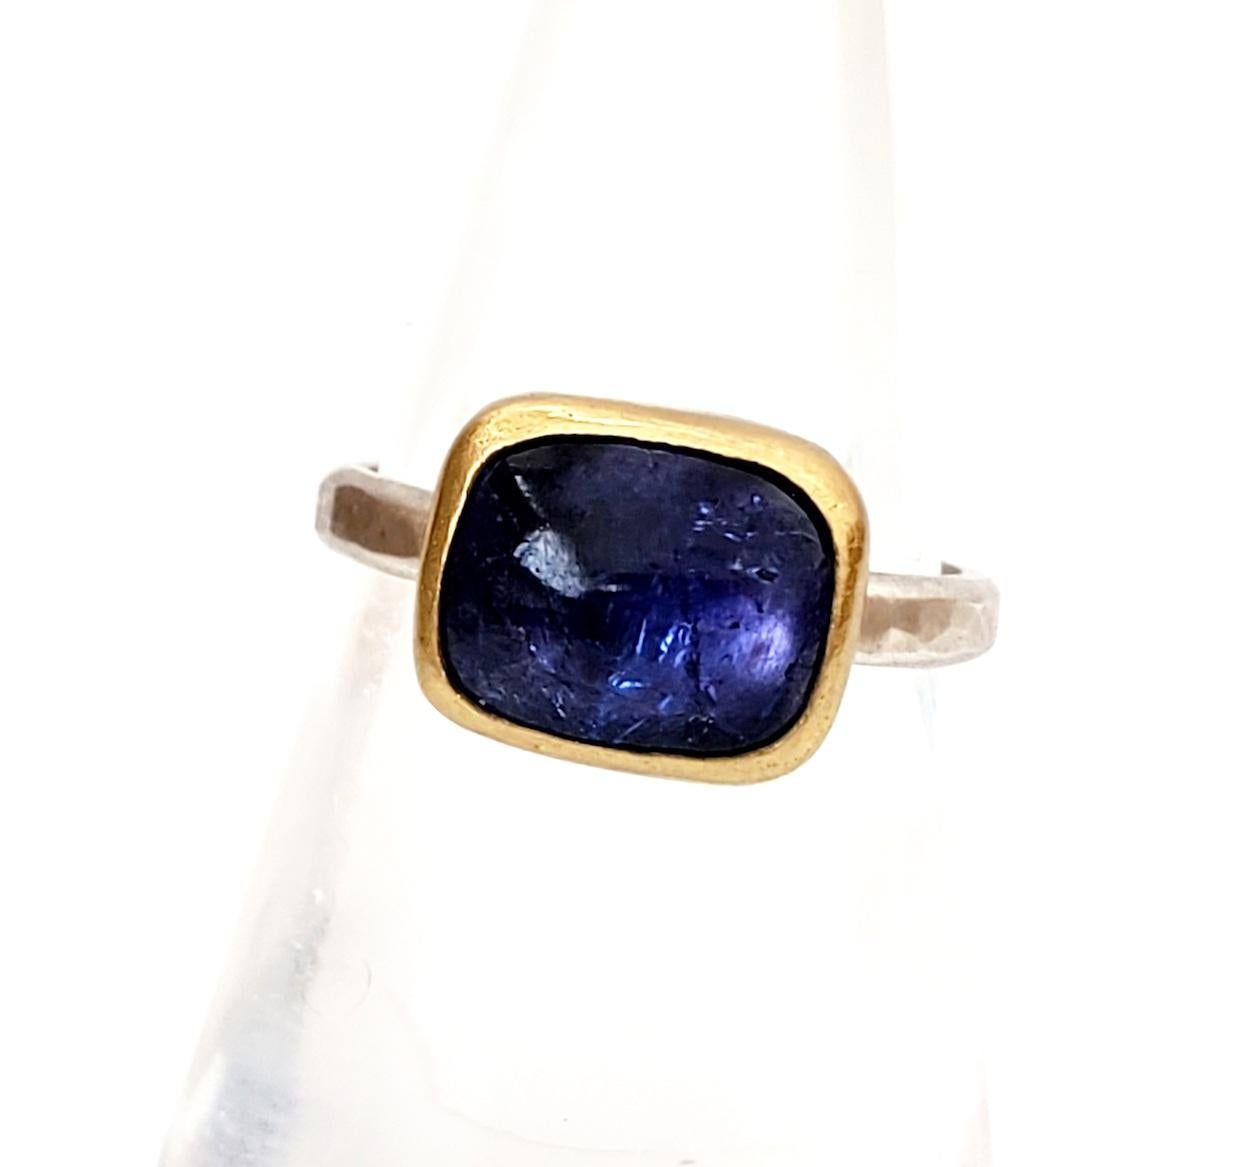 Purple/blue tanzanite square cabochon ring. This gemstone is handset in a 22K gold bezel, sterling silver back and band. Hammered band with a brush finish. Versatile, suitable for stacking. Size 7.25. Tanzanite cab: 4.1 carats

The Metaphysical